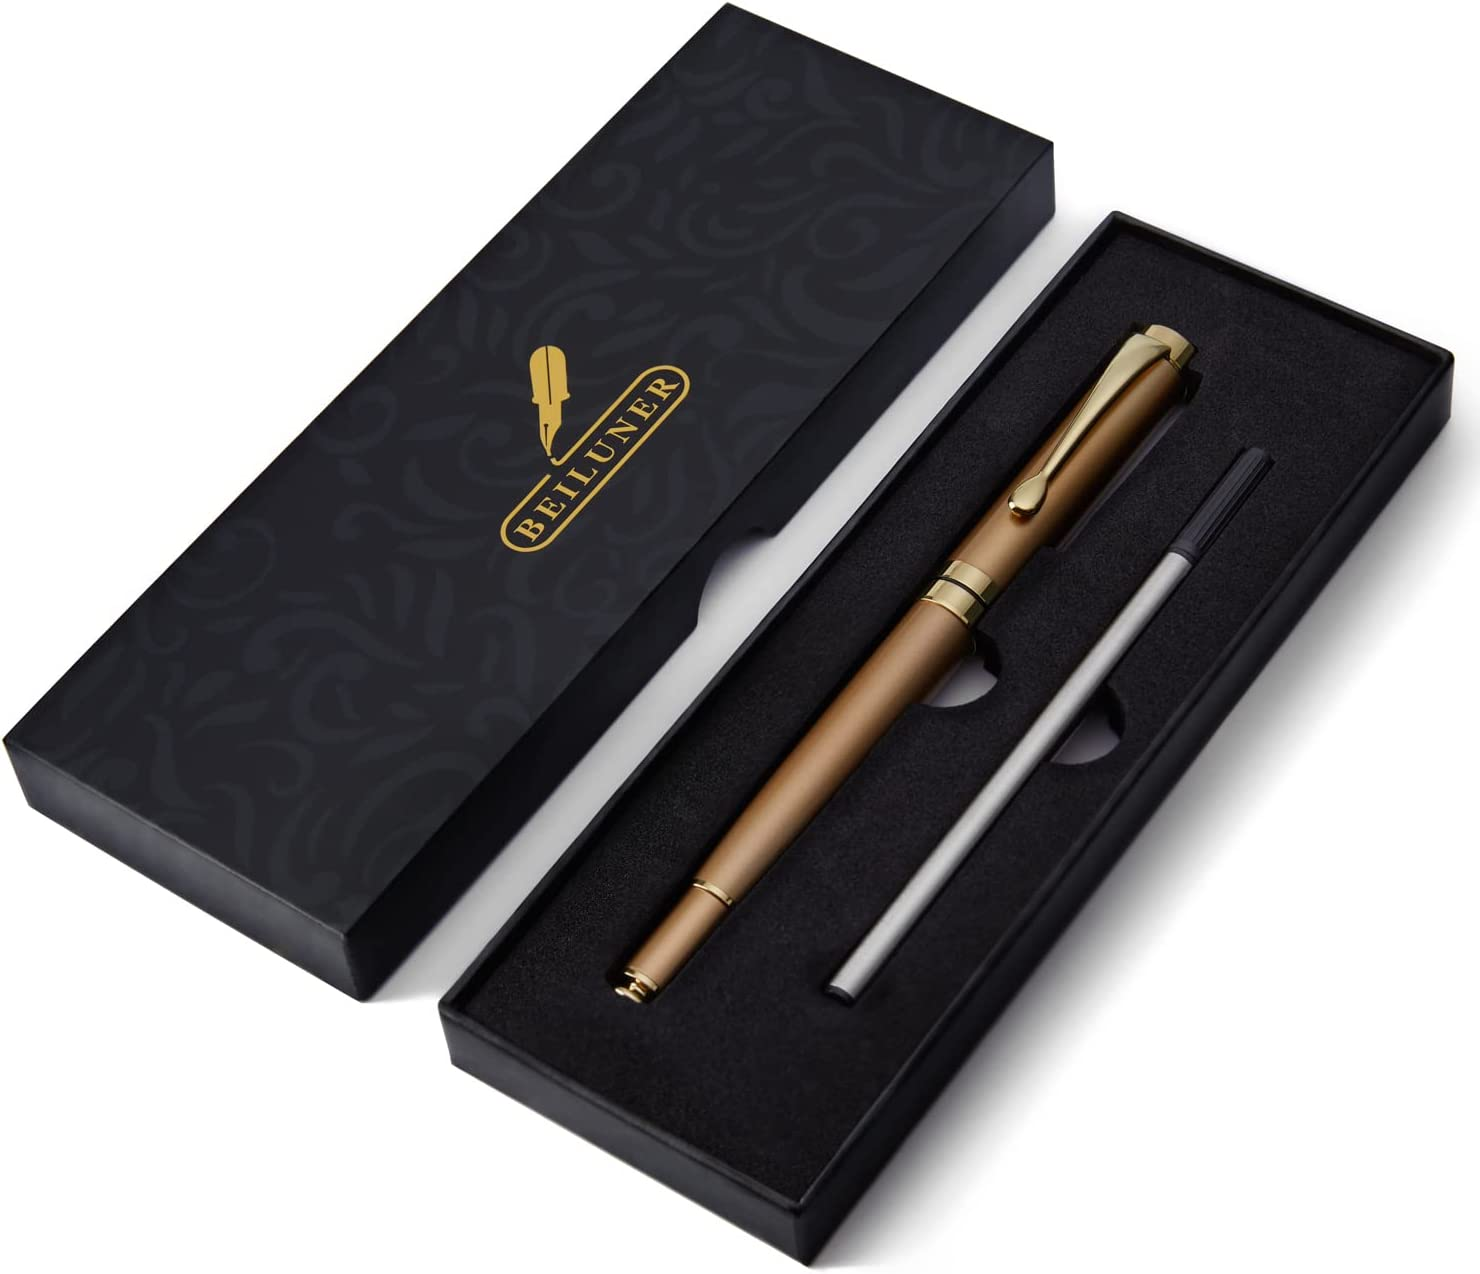 BEILUNER Ballpoint Pens, Stainless Steel with Chrome Trim, Luxury Golden Metal Pen Set, Best Ball Pen Gift Set for Men & Women, Professional, Executive, Office, Fancy Pens-Nice Box with Extra Refill